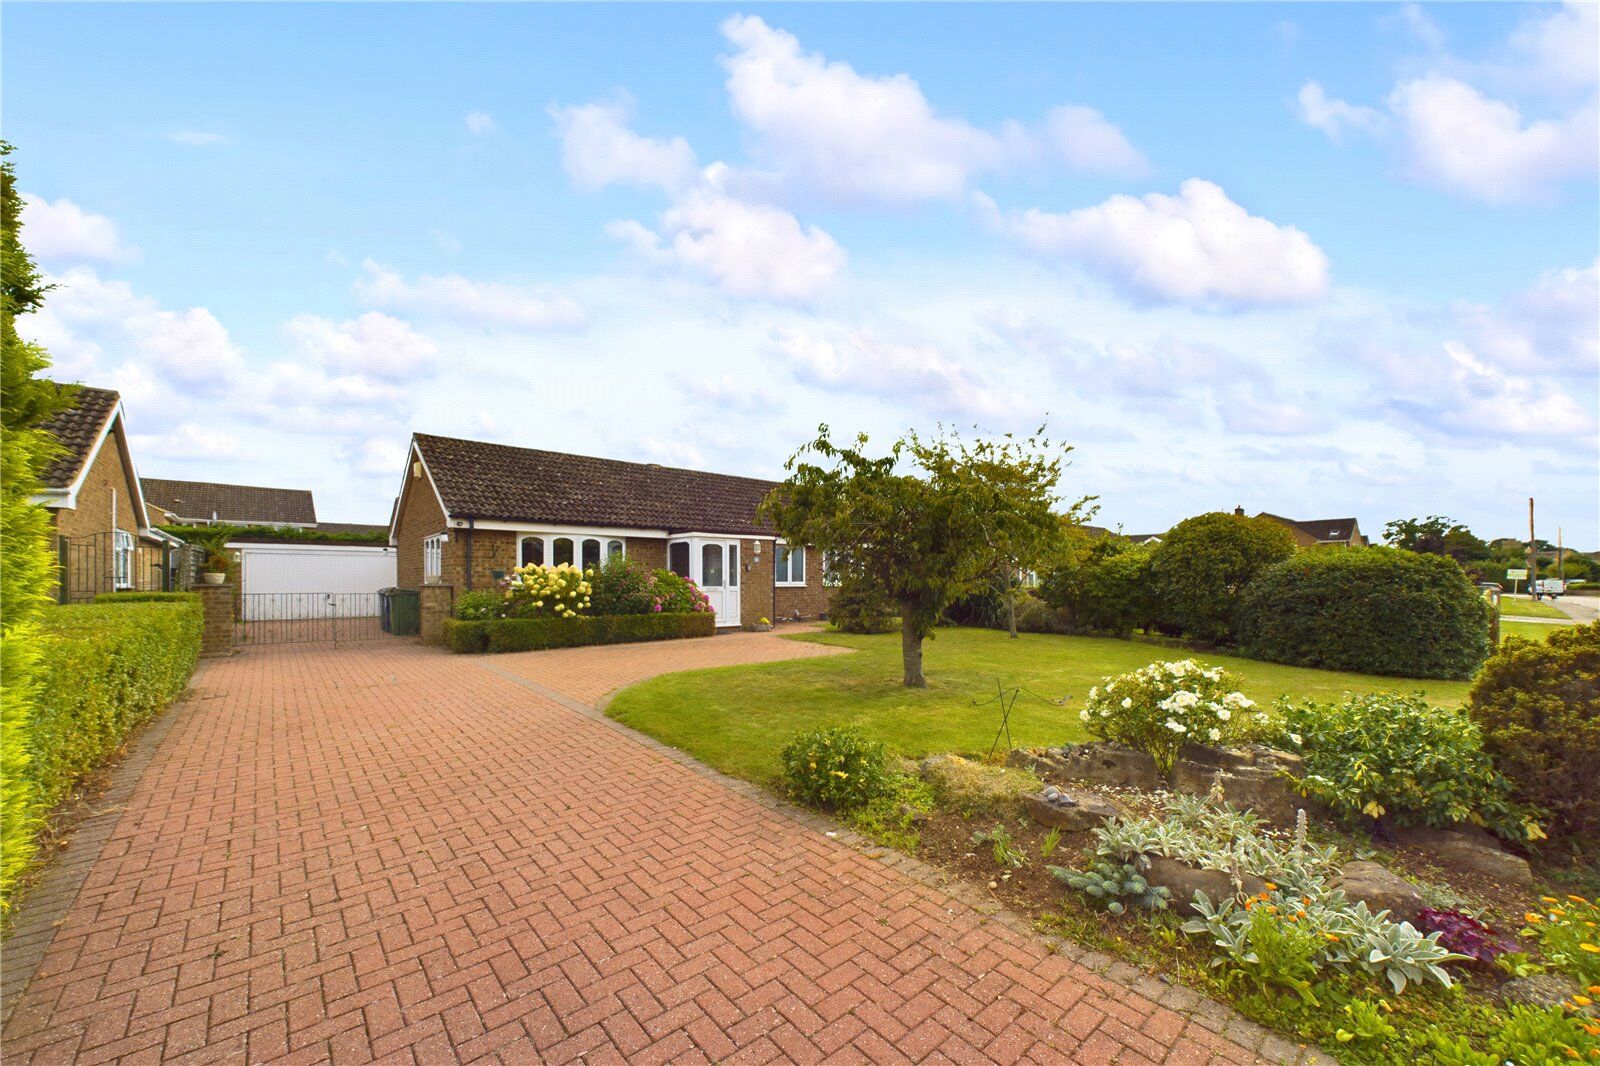 2 bedroom detached bungalow for sale High Street, Little Paxton, PE19, main image